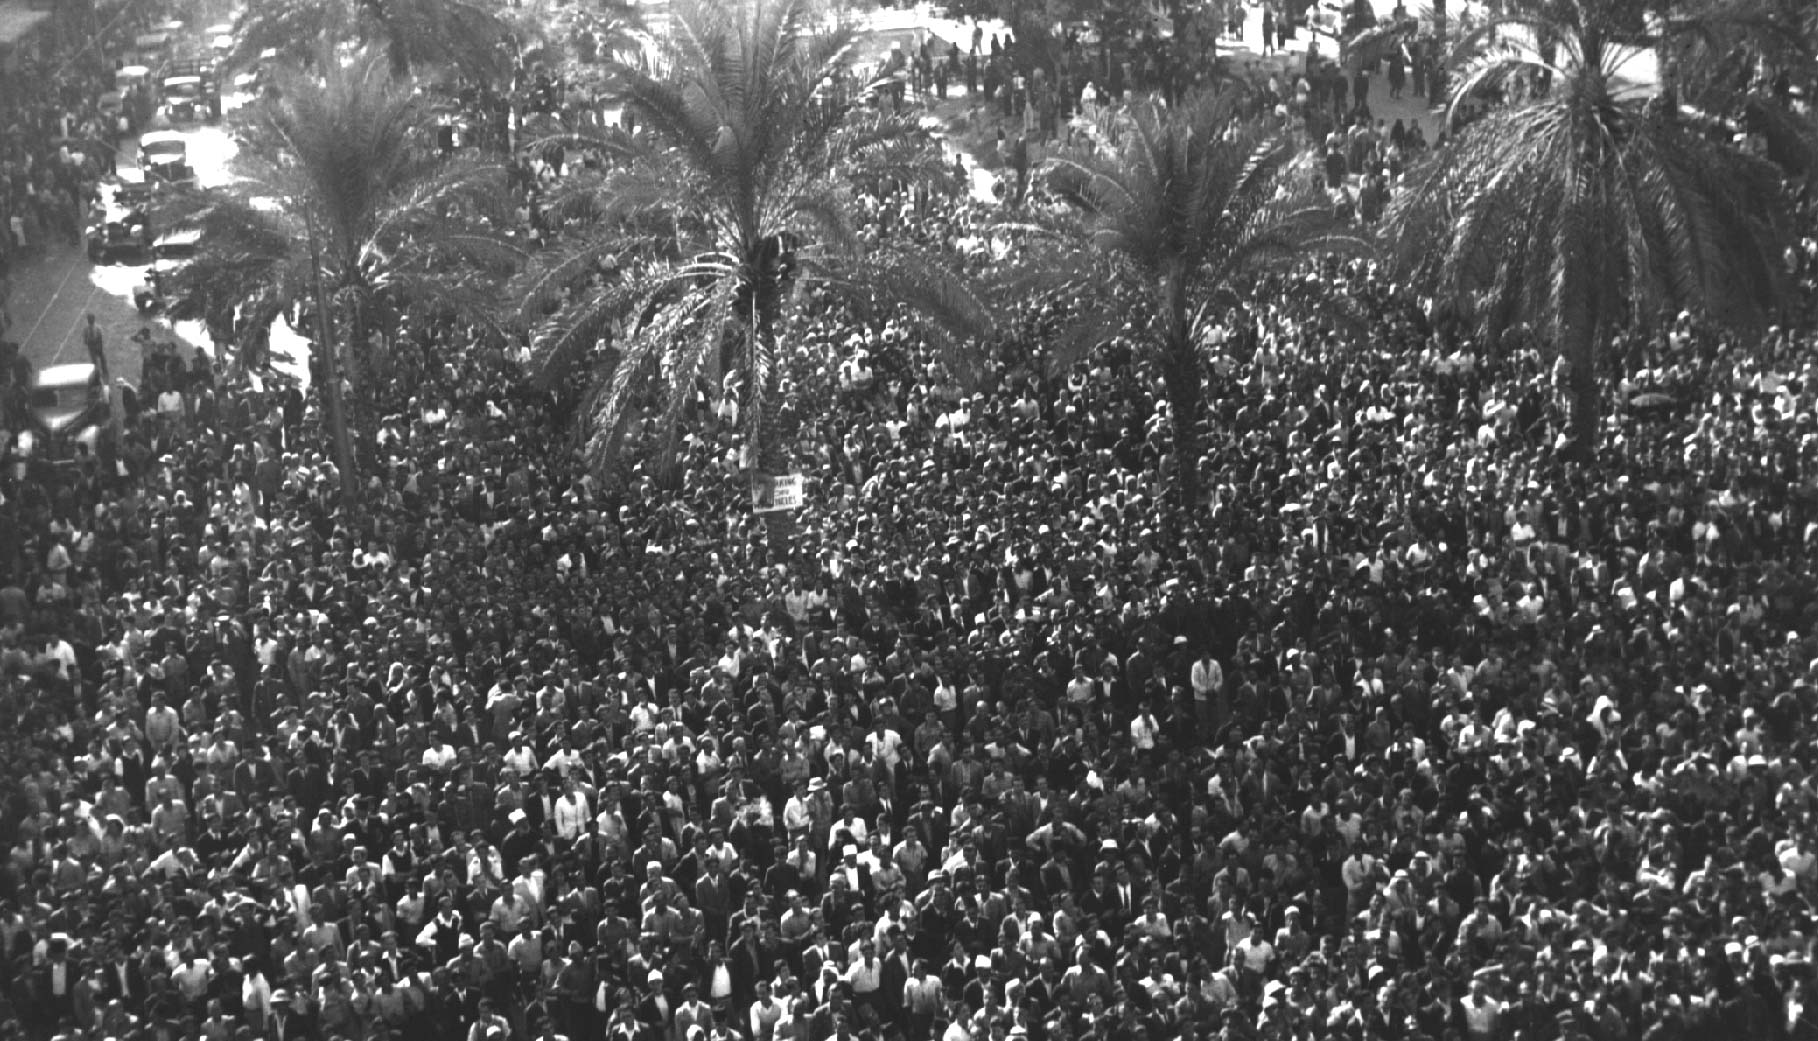 HISTORY: How Lebanon gained its independence